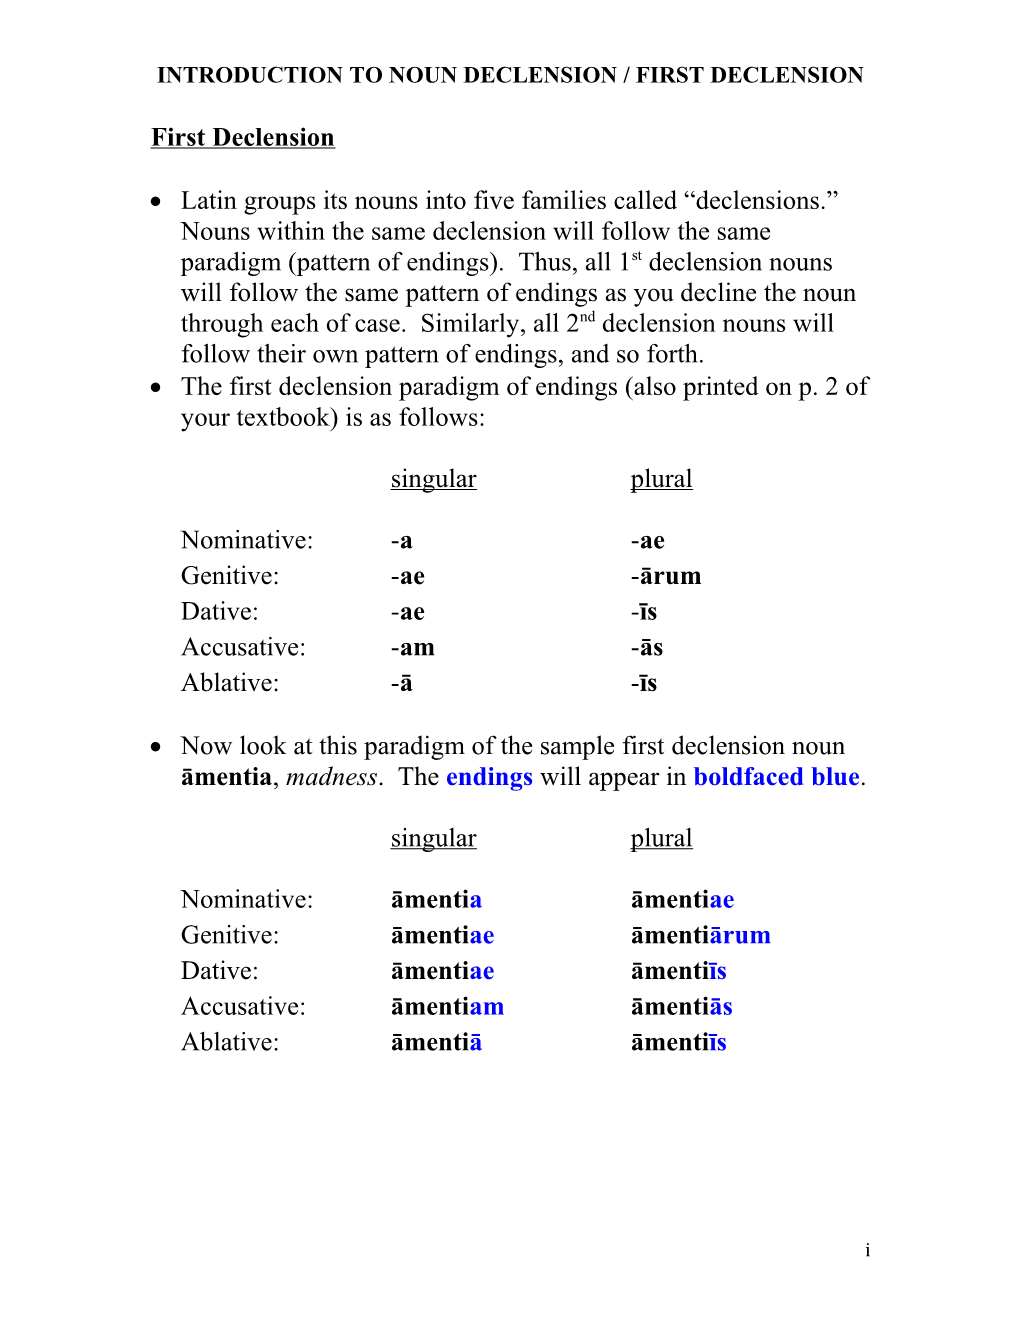 Introduction to Noun Declension / First Declension